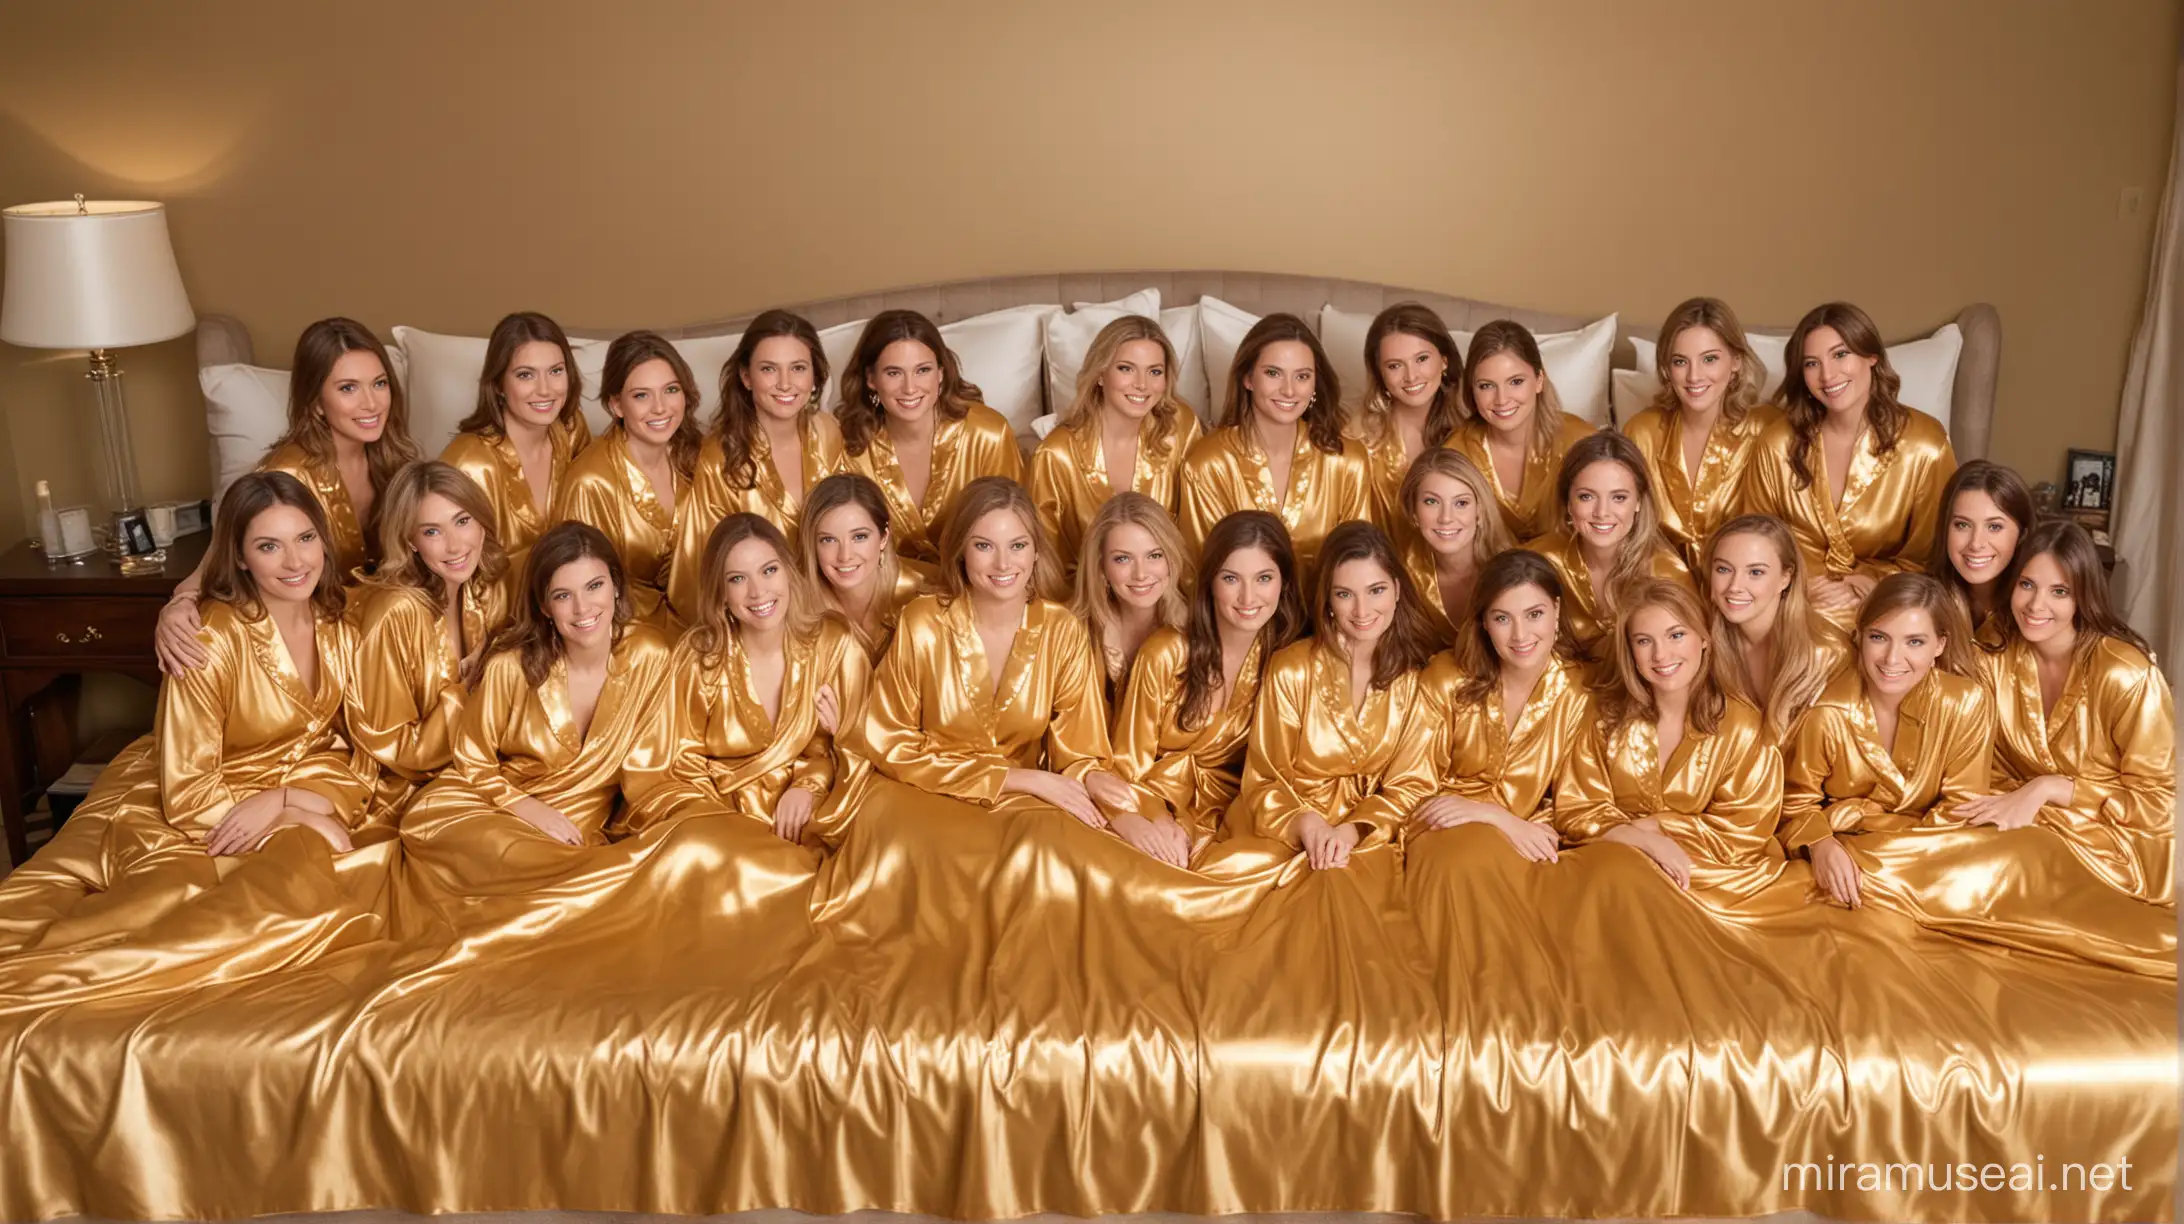 Elegant Women in Gold Satin Nightgowns on Luxurious Satin Beds